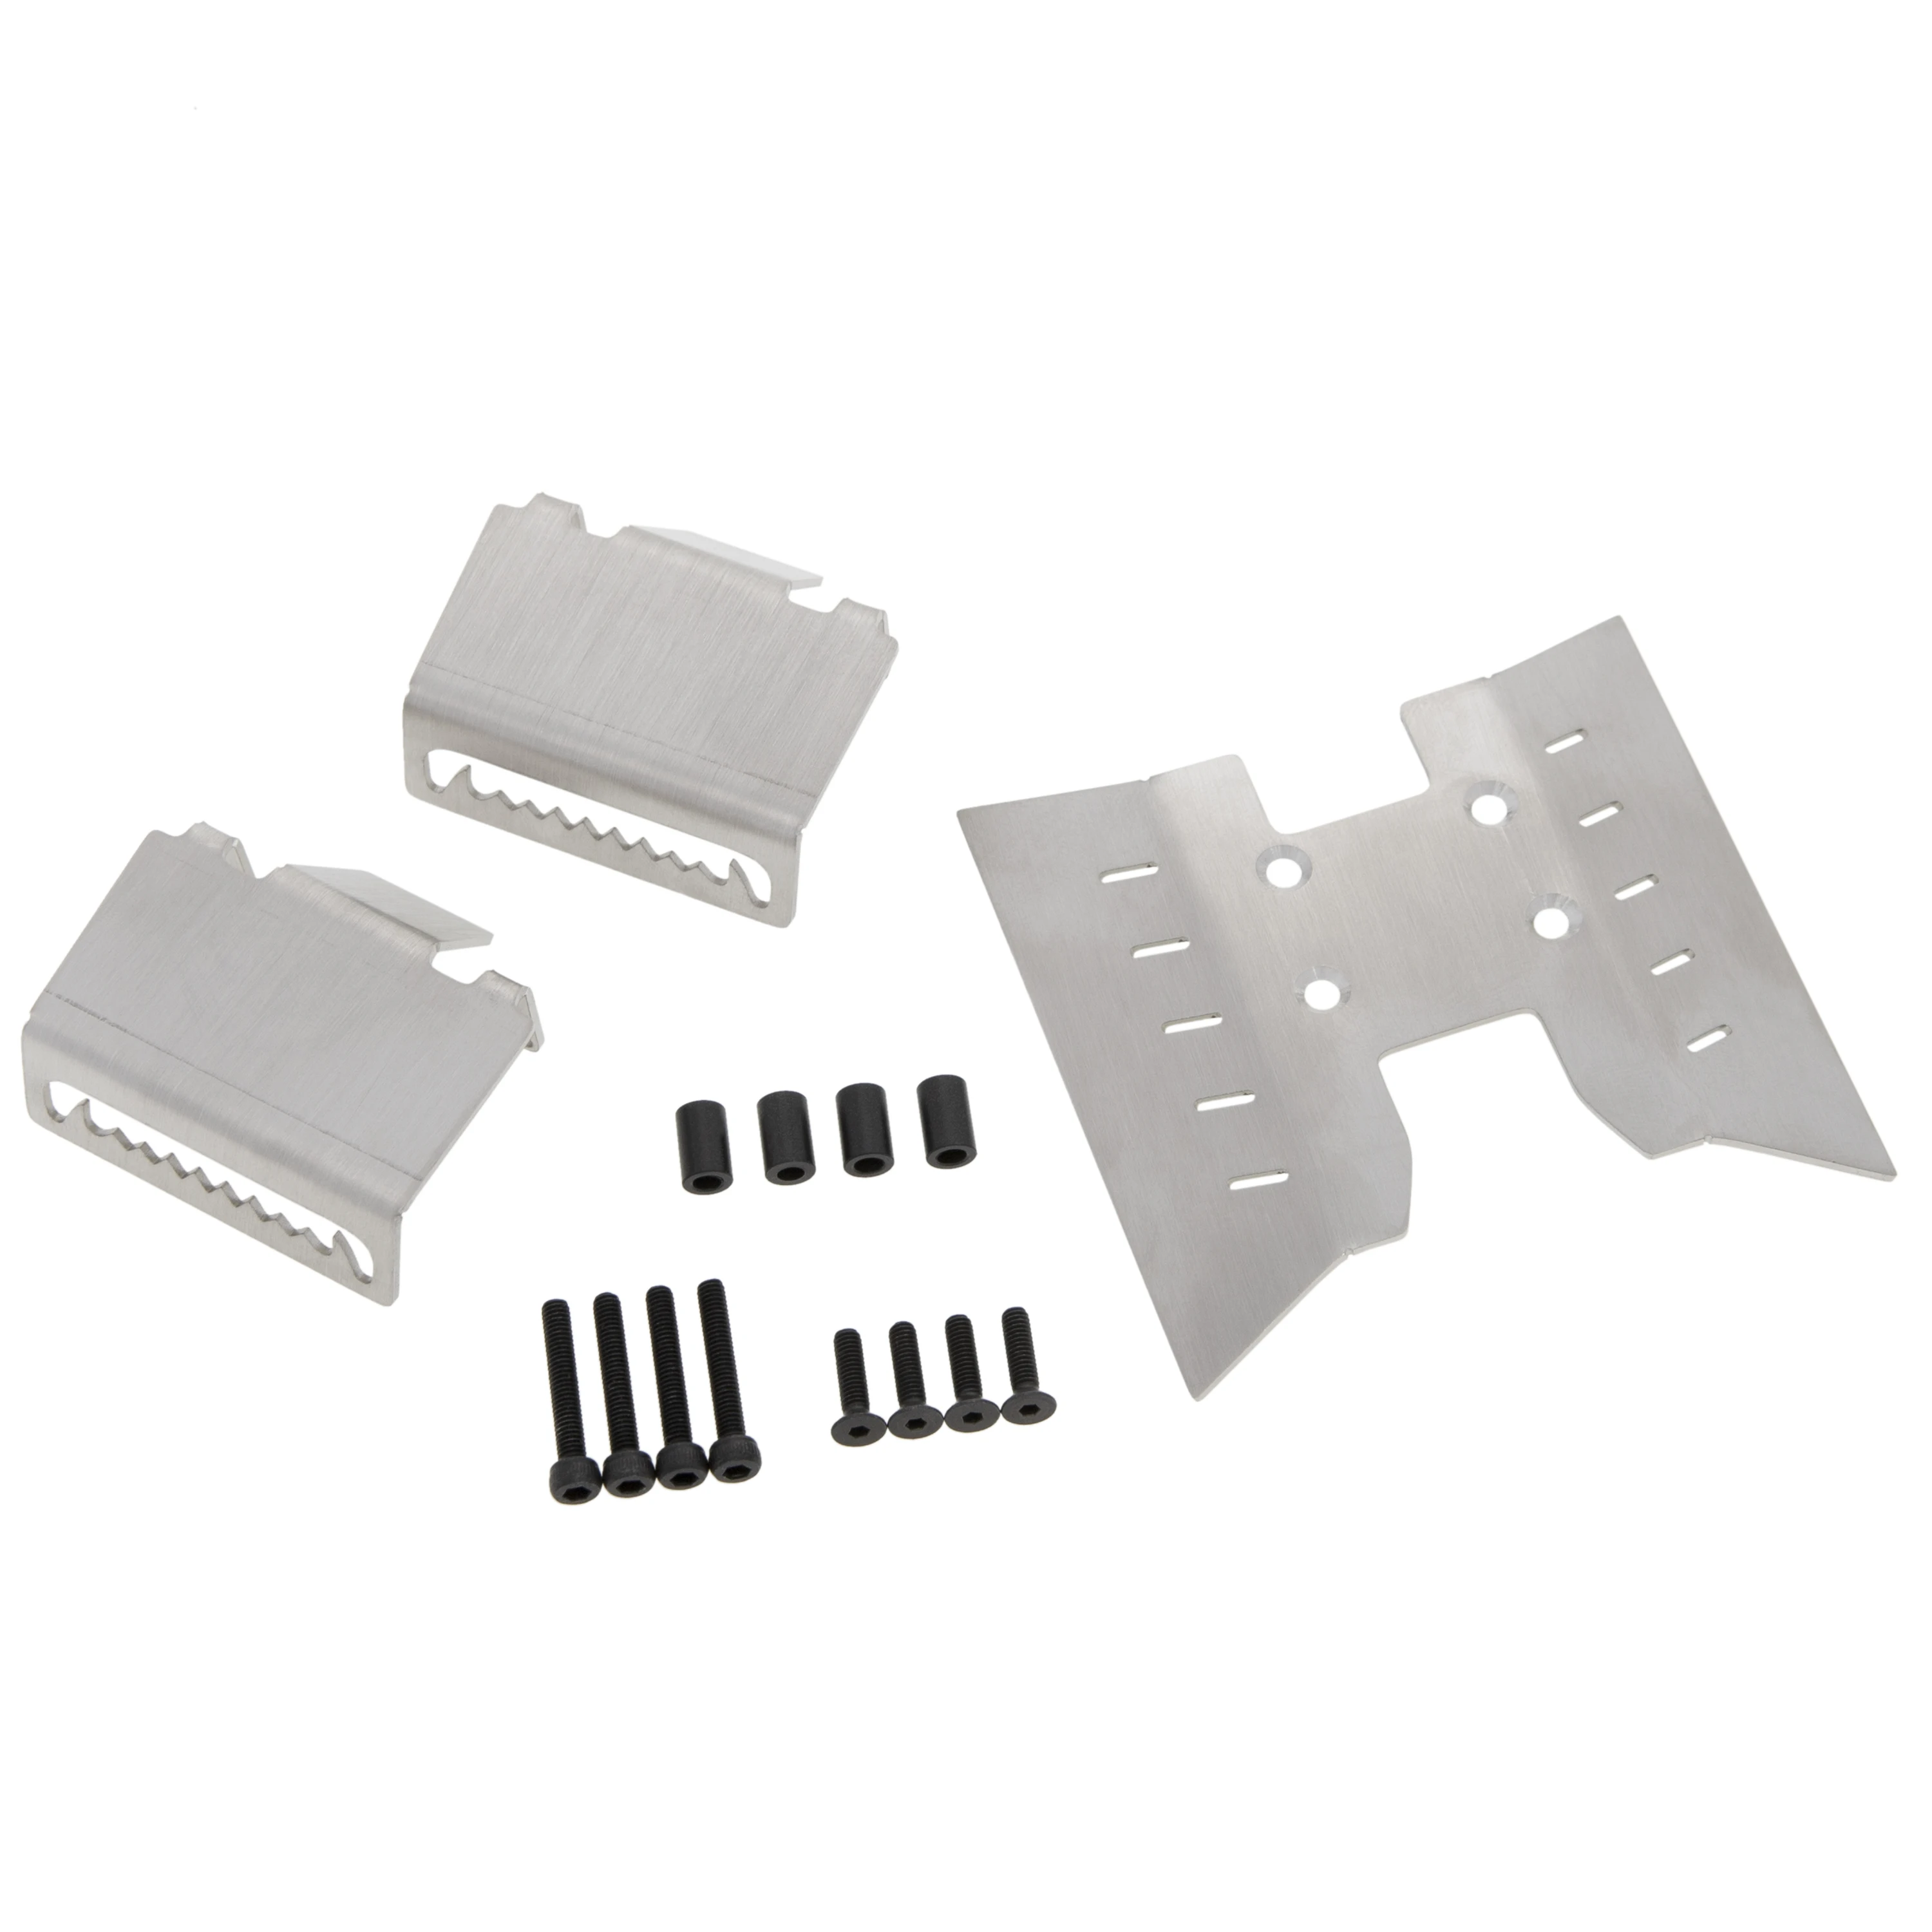 

MEUS RACING Stainless Steel Skid Plate Chassis Armor Kit for AXIAL 1/18 UTB18 Capra Crawler Car